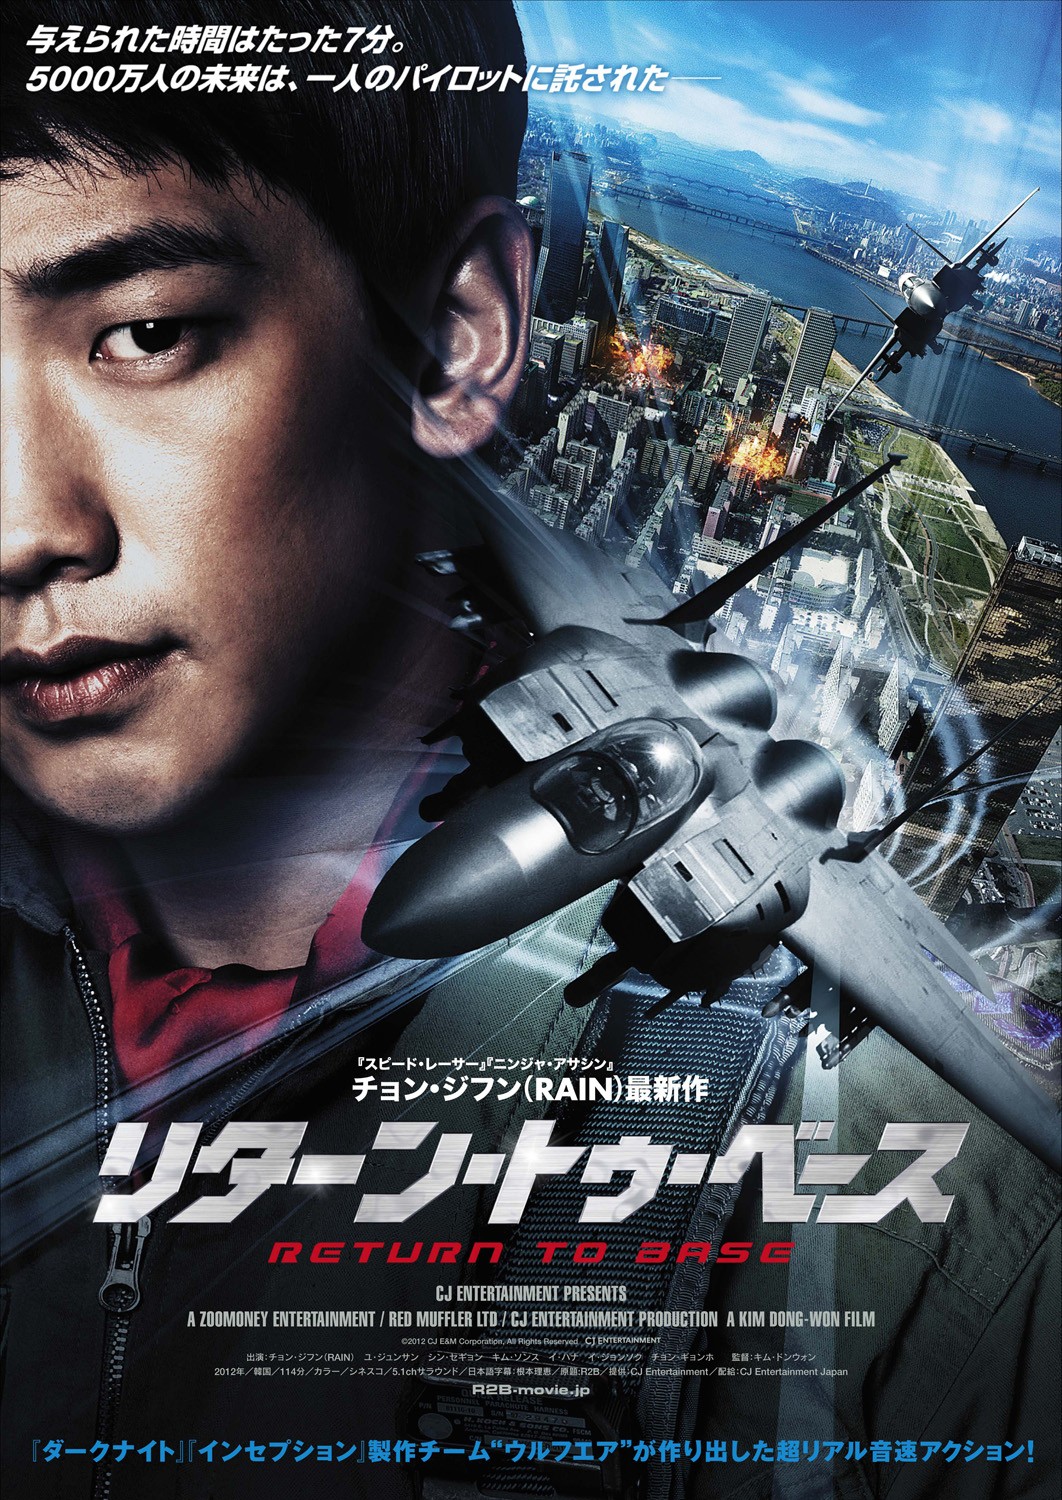 Extra Large Movie Poster Image for Al-too-bi: Riteon Too Beiseu 